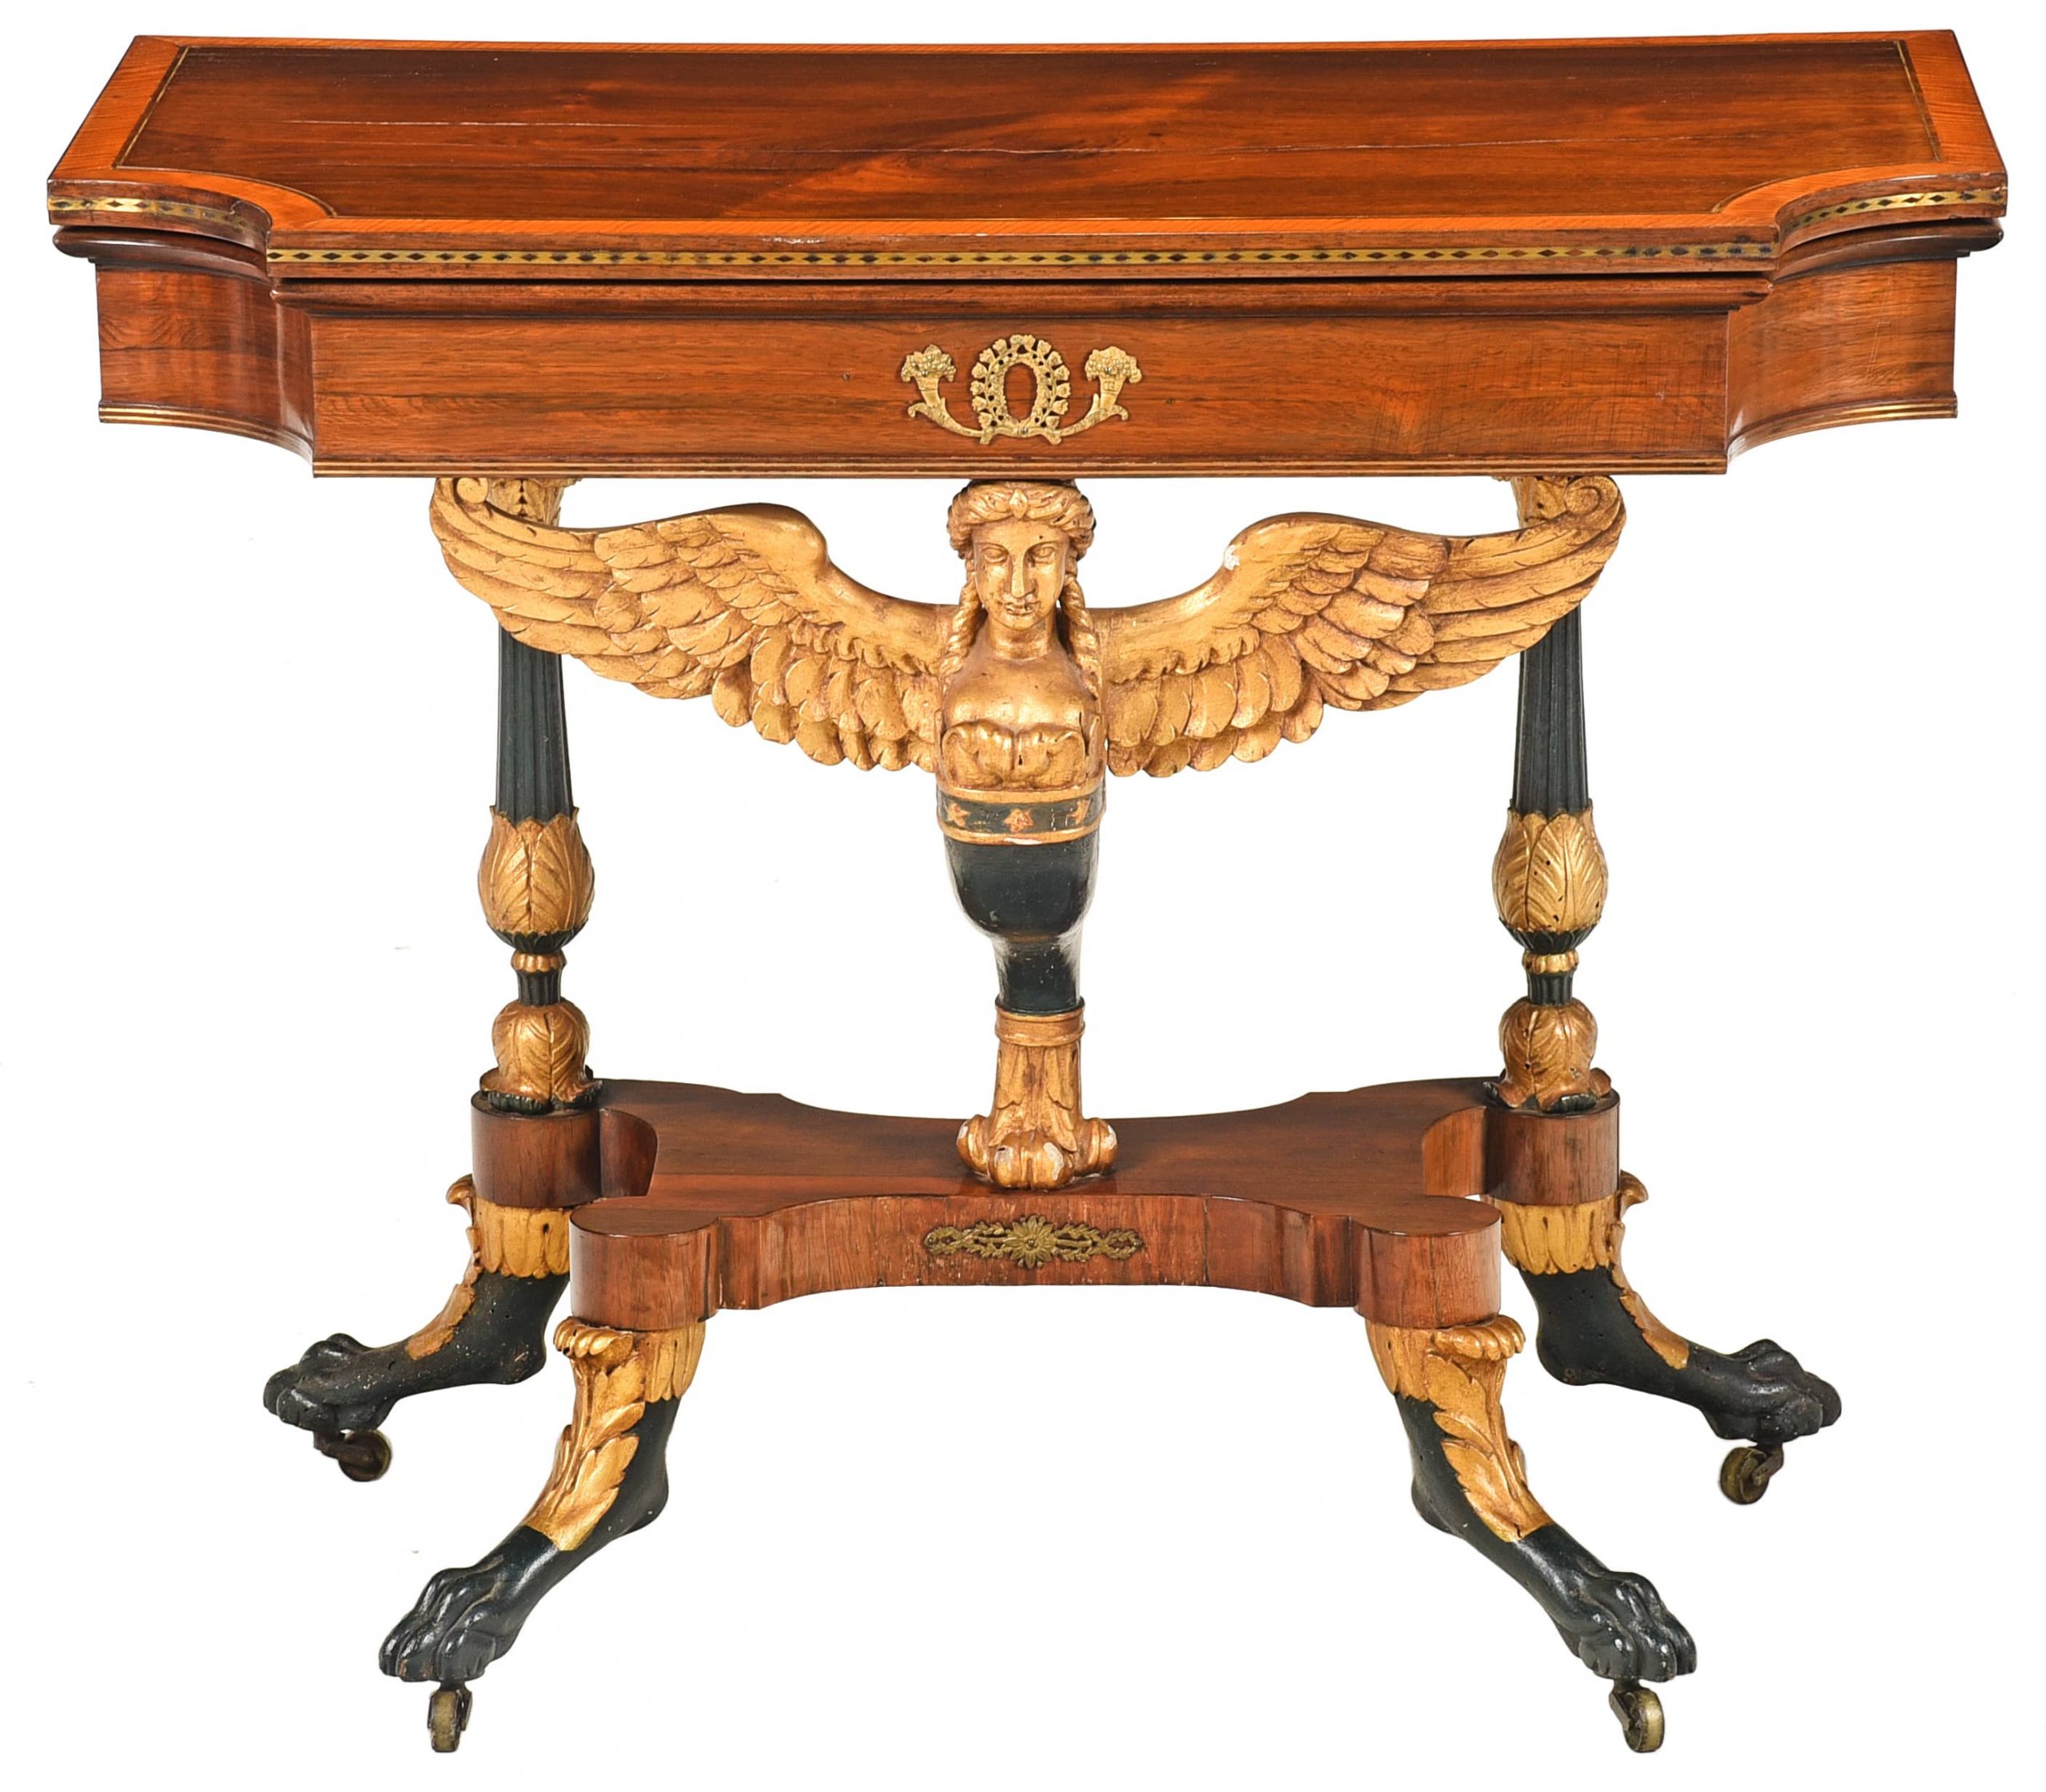 Fine Classical Gilt, Vert, Antique, and Rosewood Caryatid Table